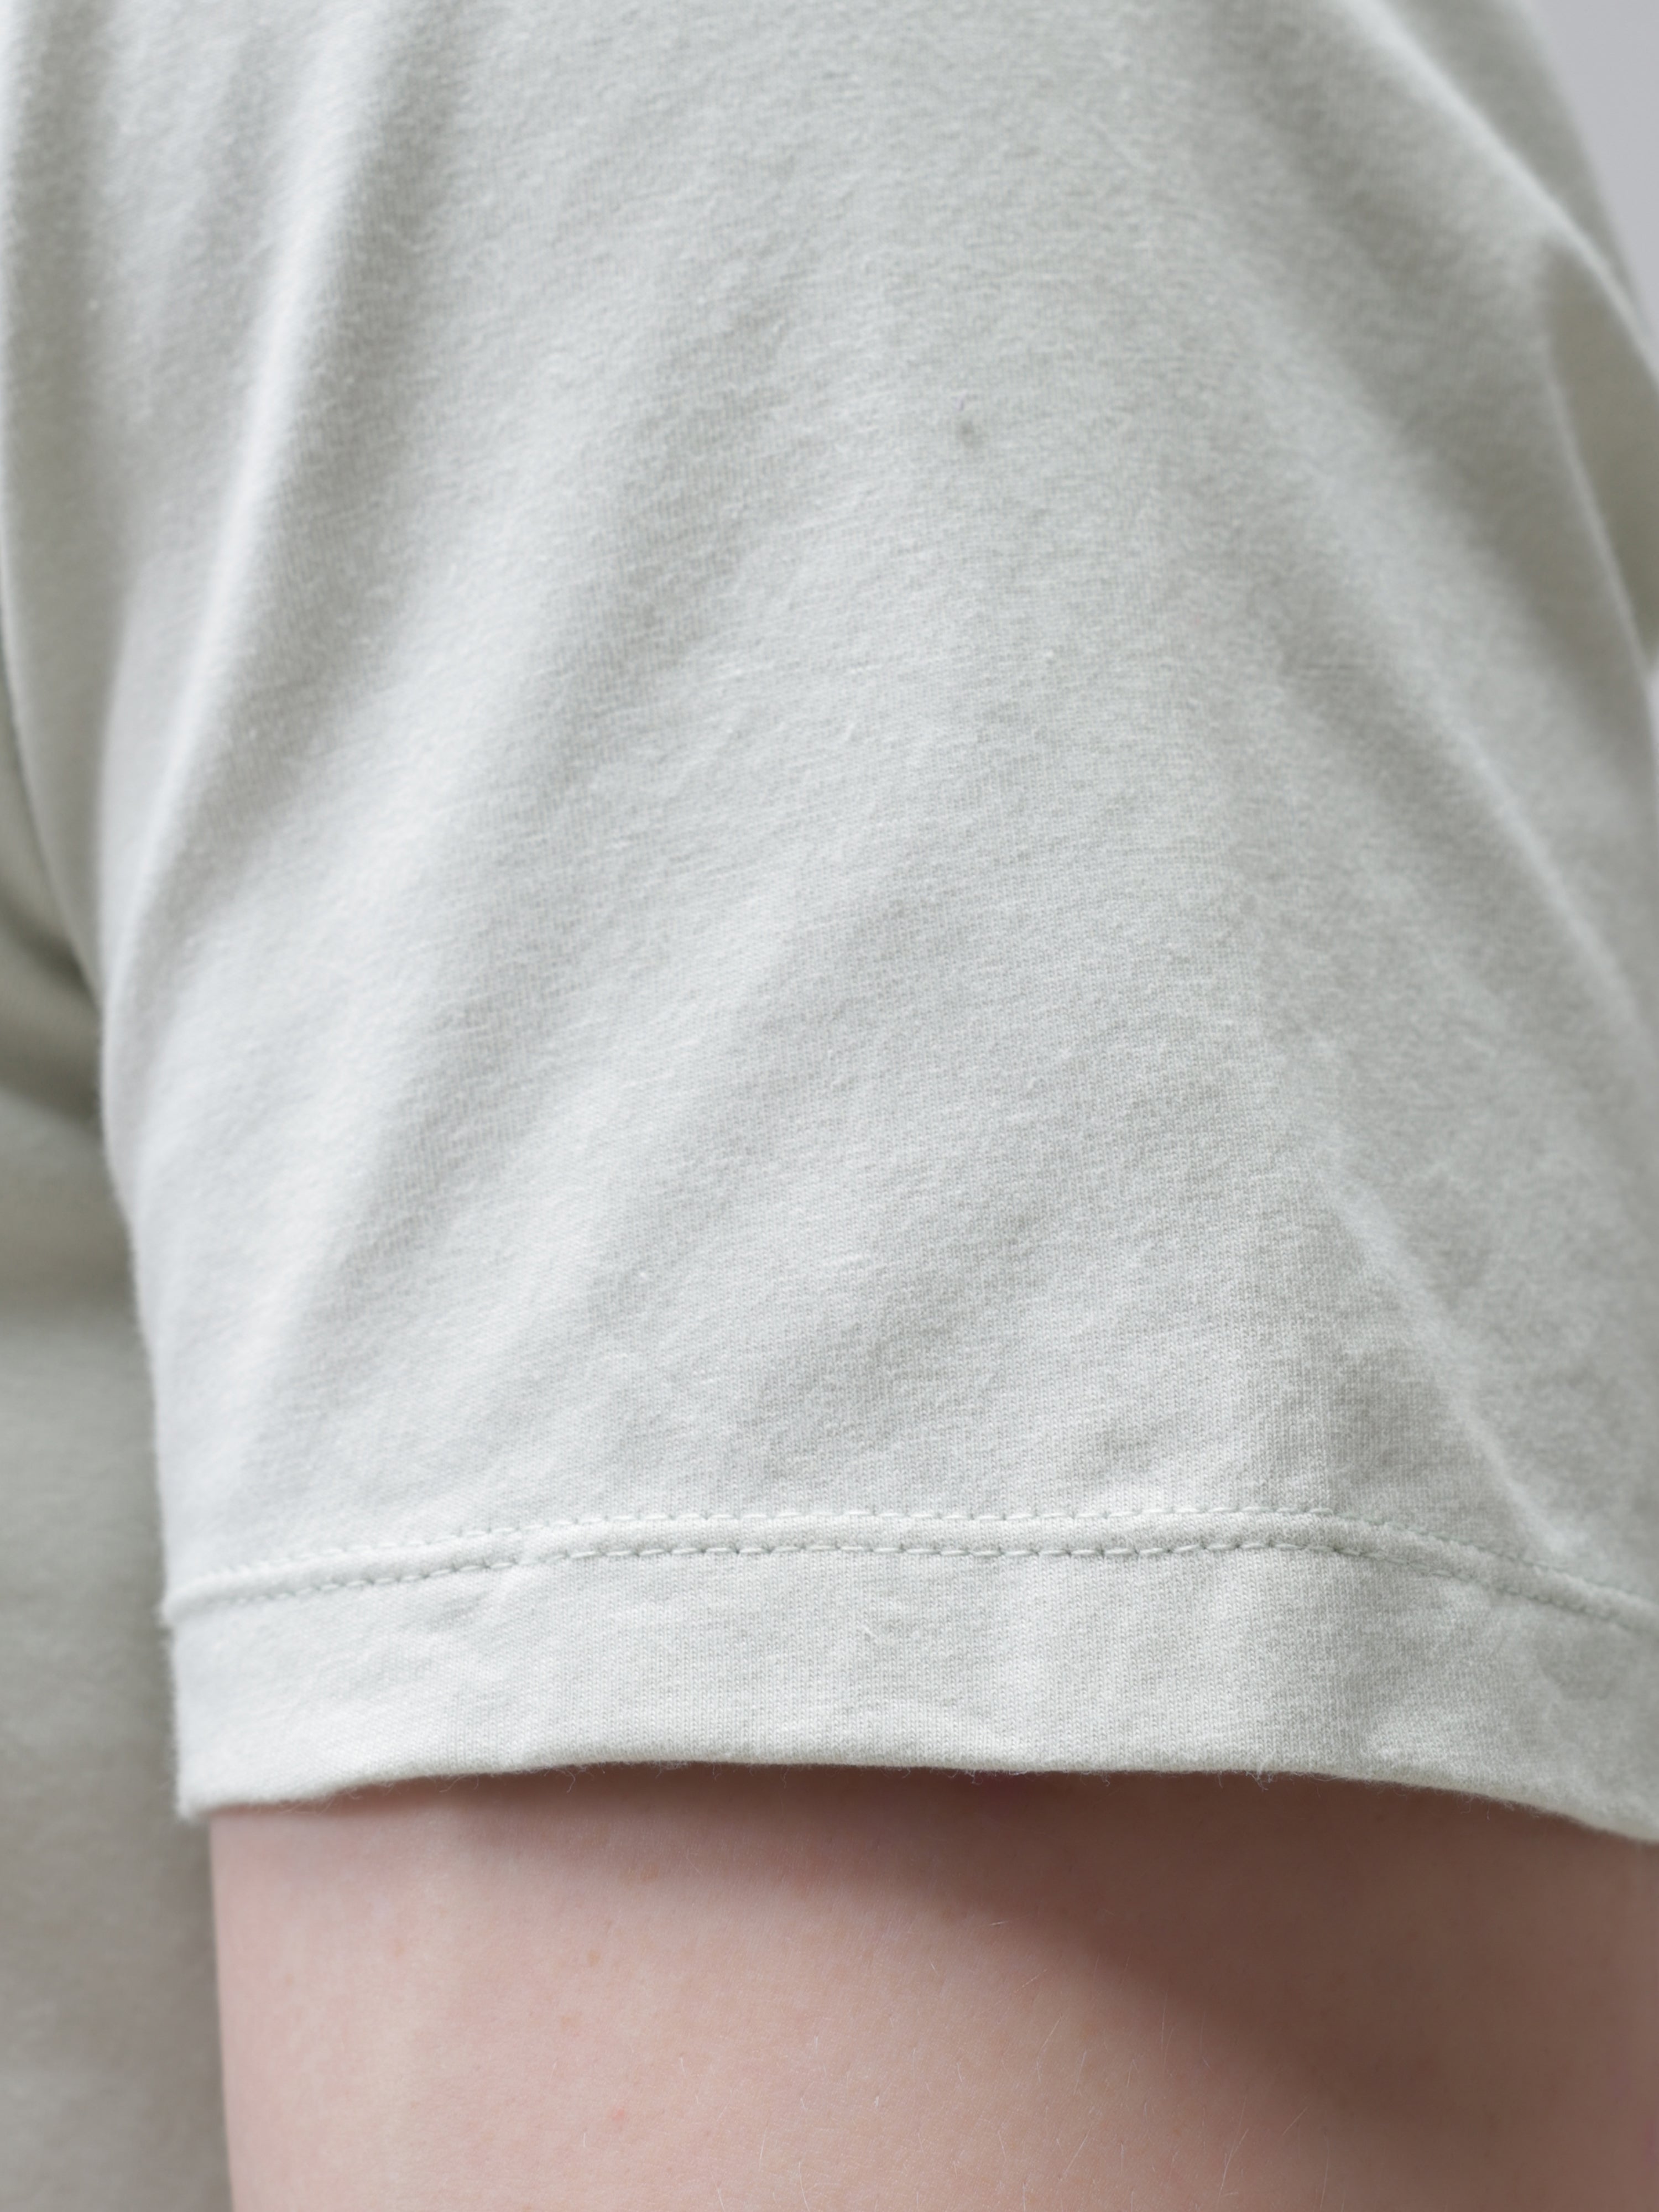 Close-up of sleeve on Lime Enigma Turms T-shirt, showcasing its anti-stain, anti-odour, and stretchable premium cotton fabric.